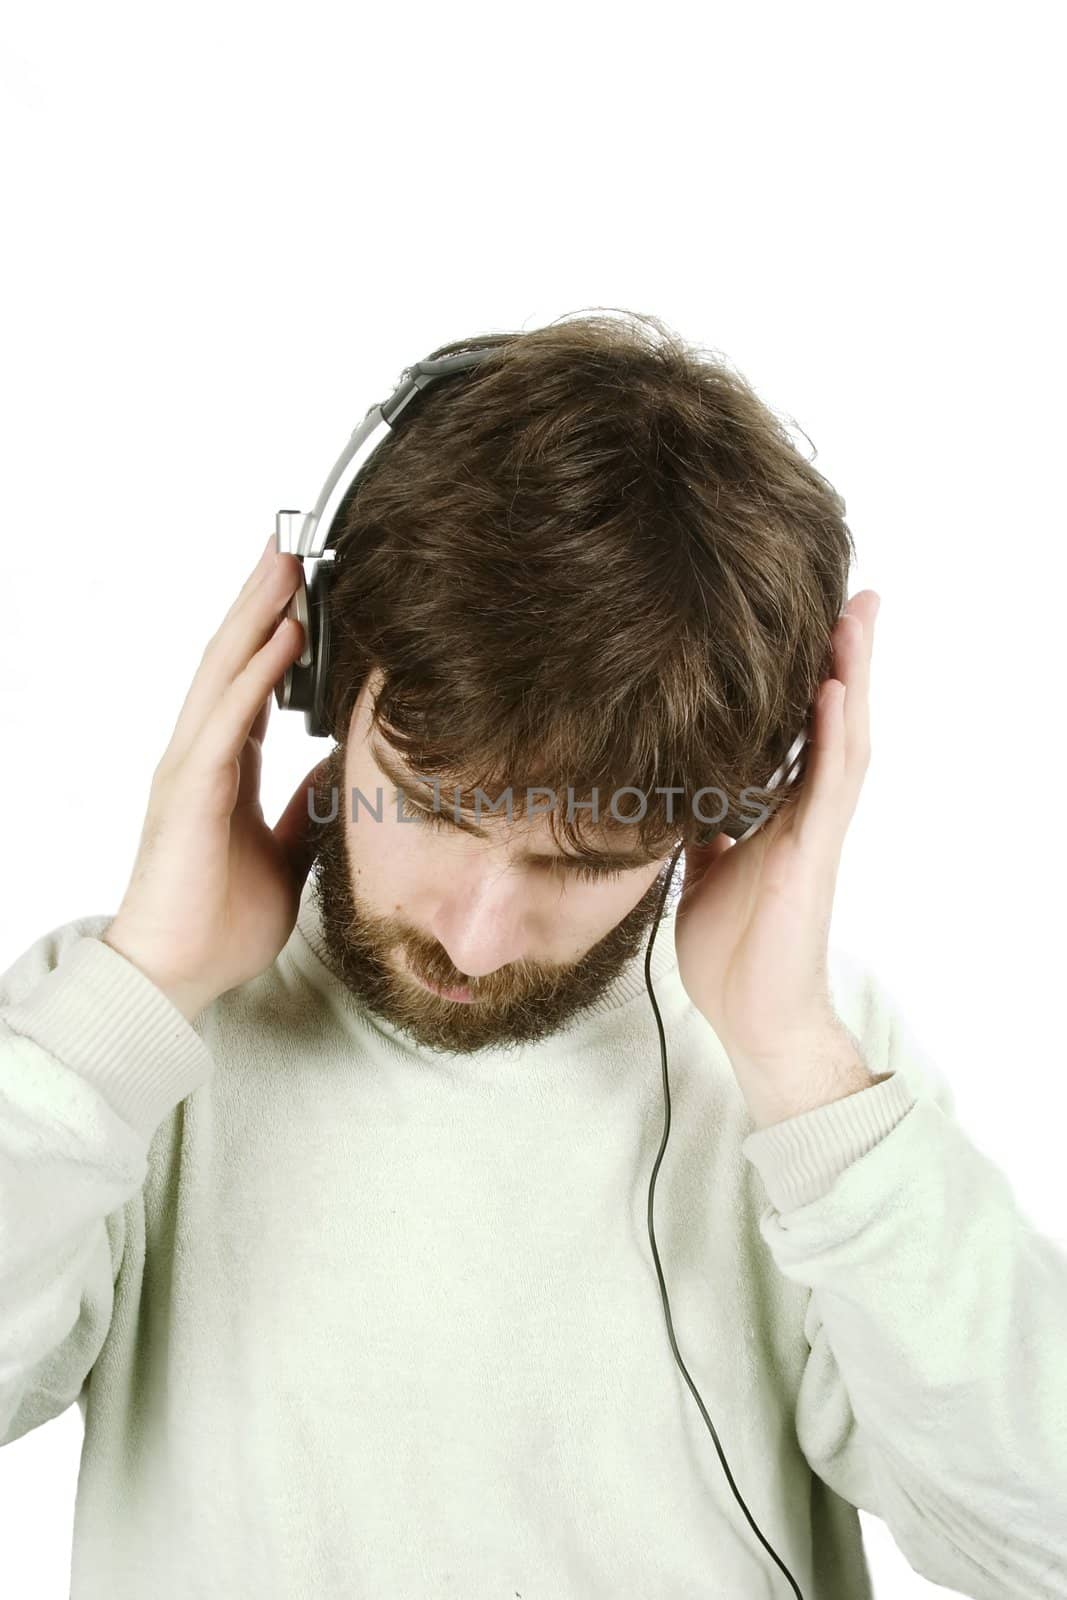 A young male with a beard listening to music on headphones. Isolated on white with clipping path.